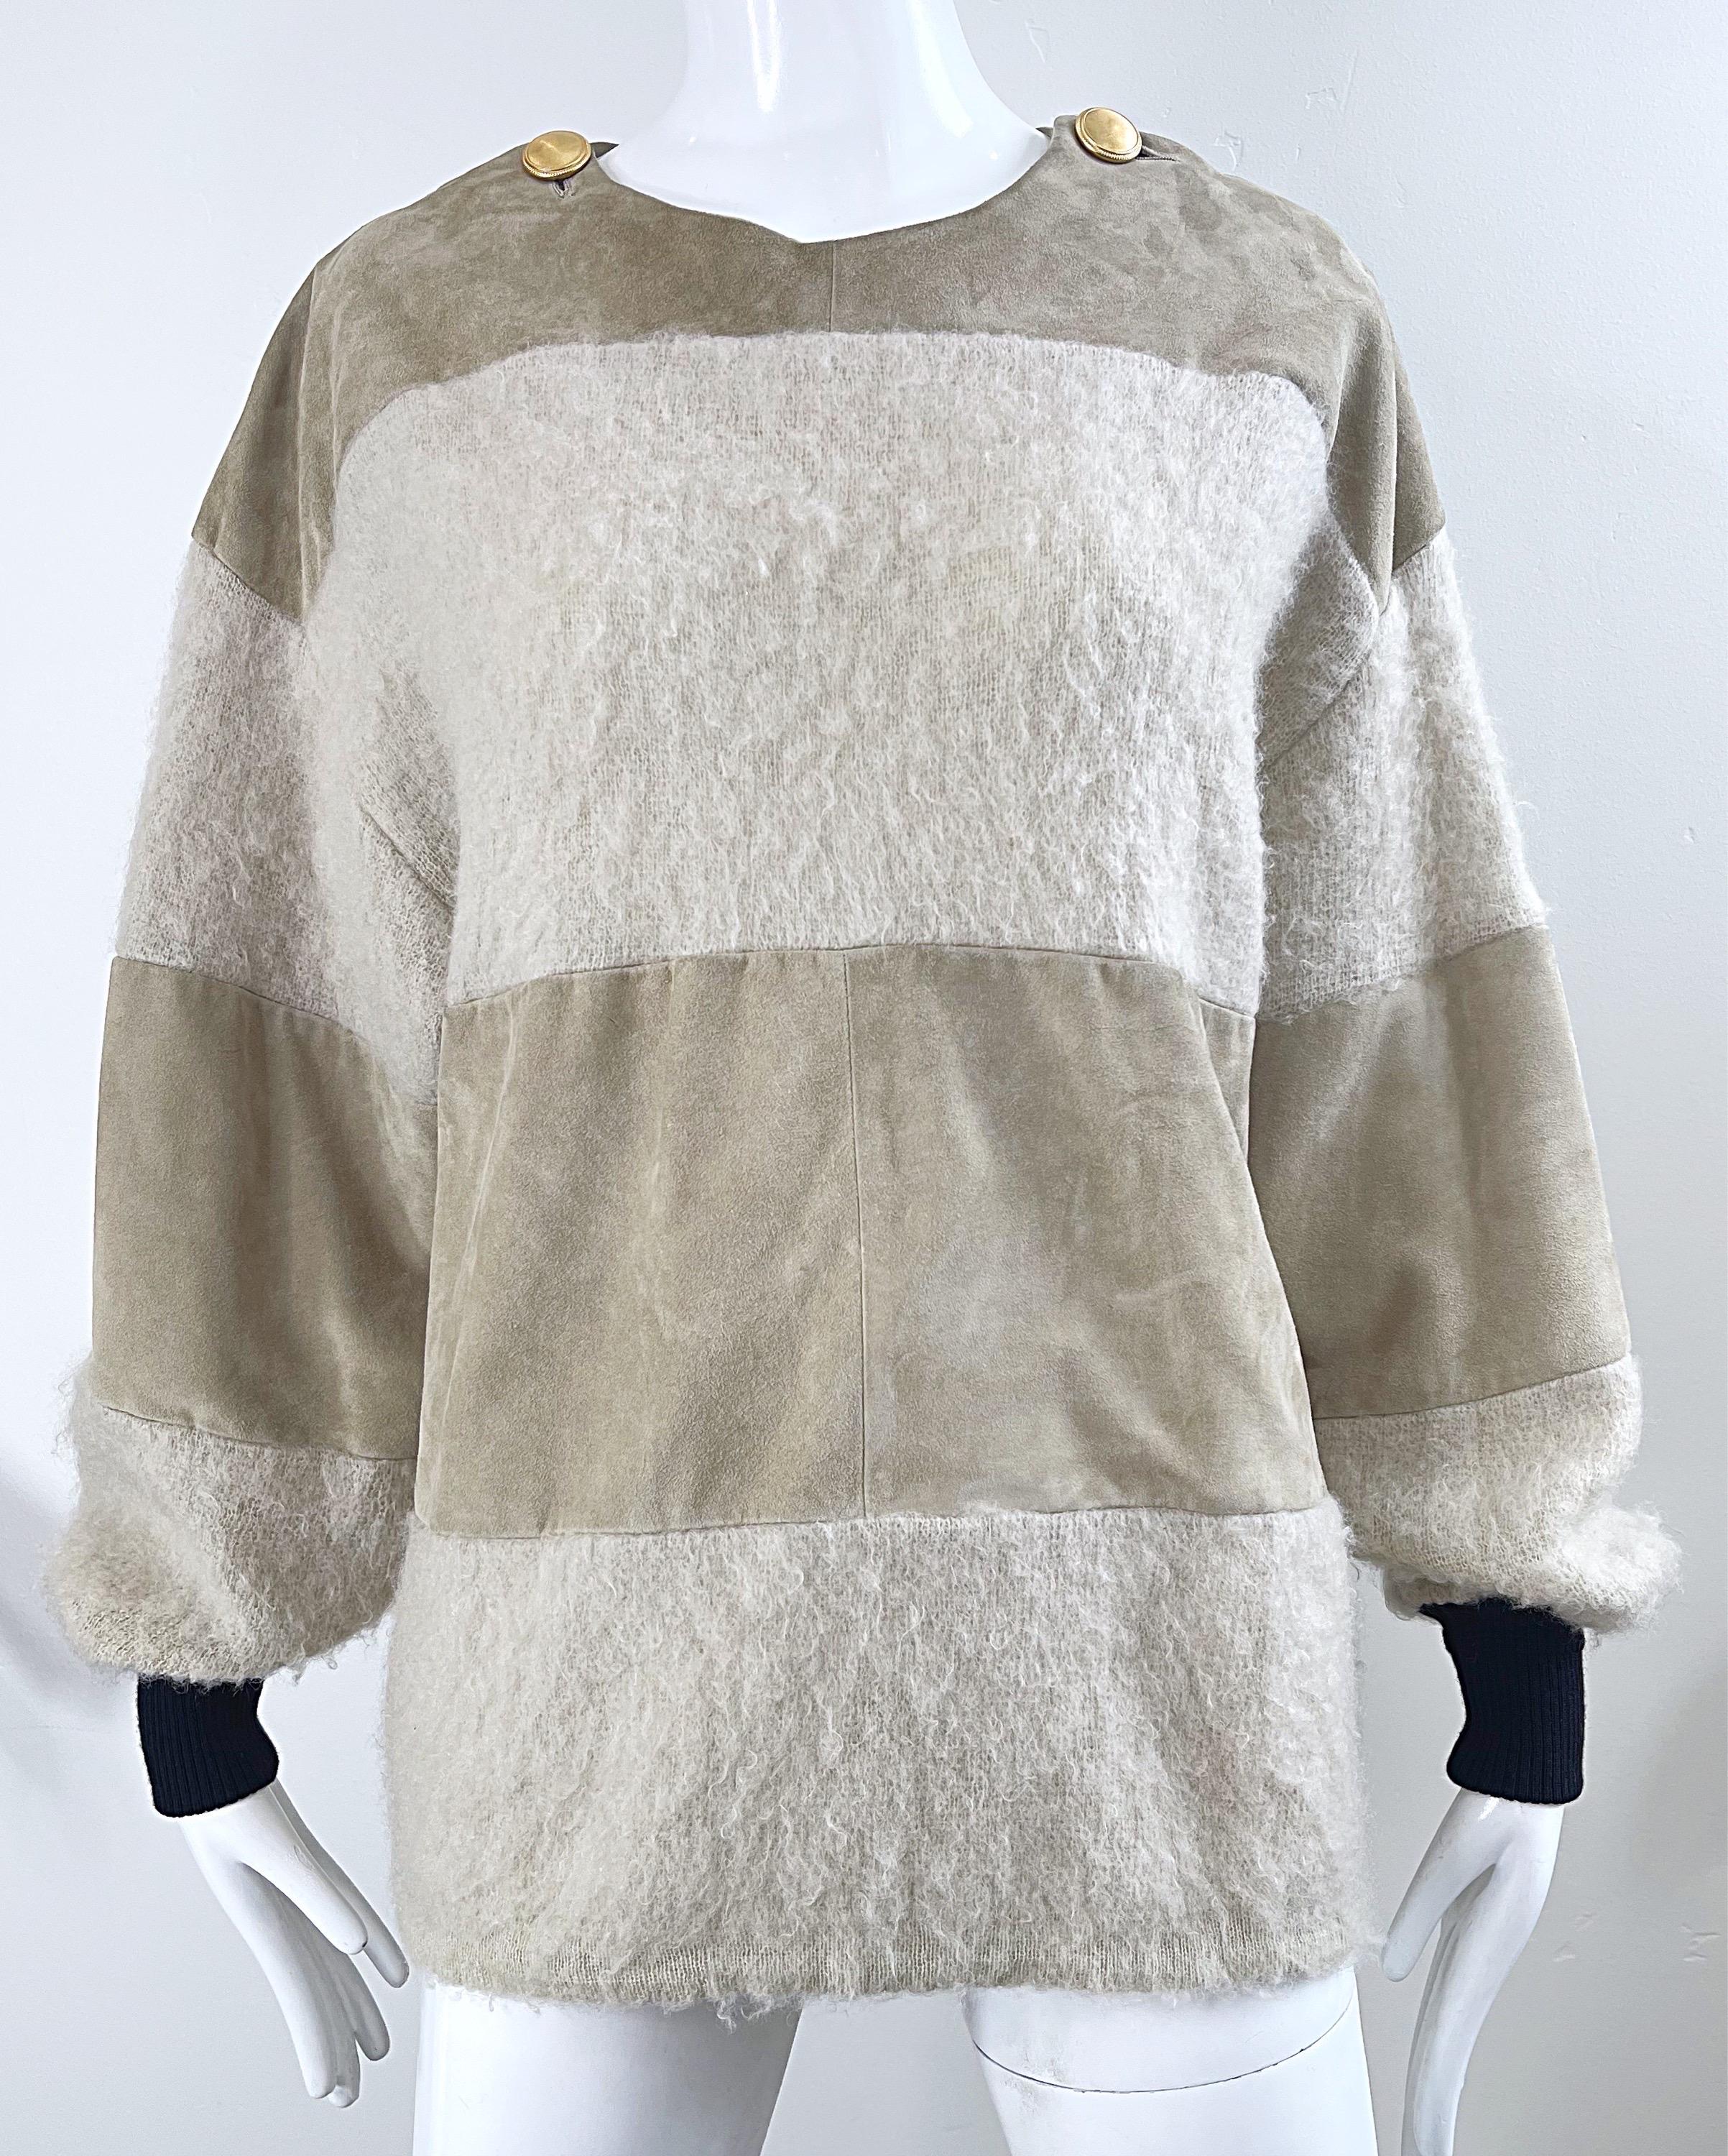 Gianfranco Ferre 1990s Leather Suede + Mohair Tan Nude Vintage 90s Sweater Top For Sale 5